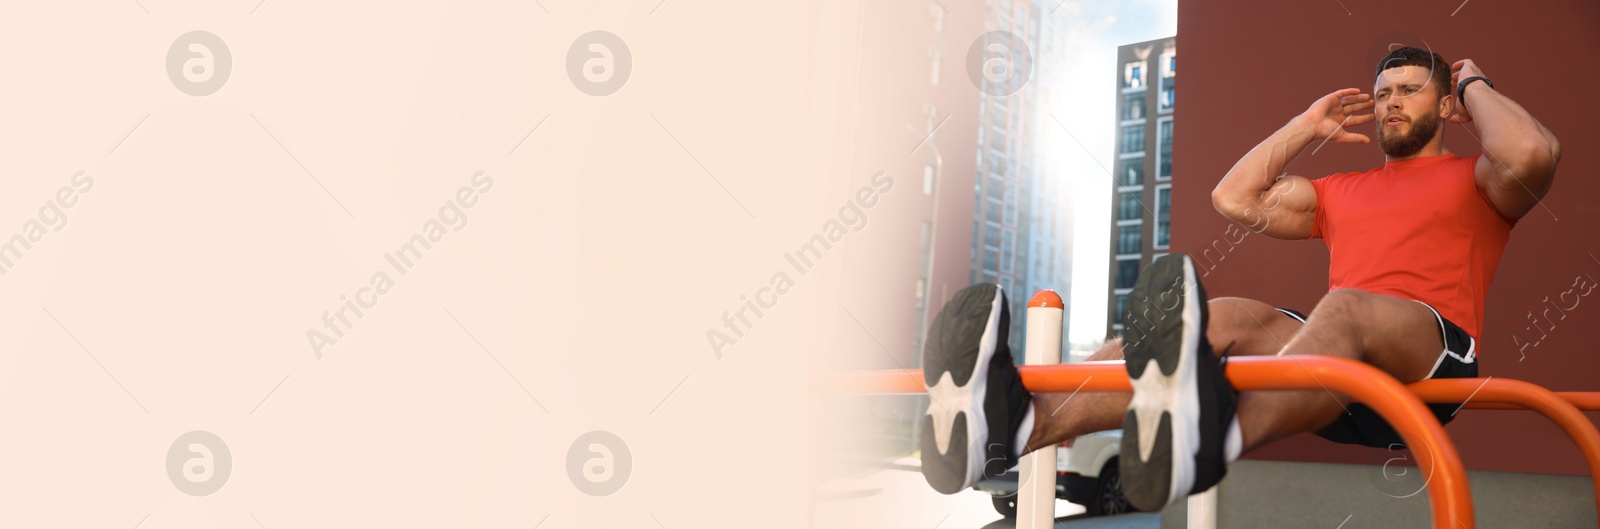 Image of Handsome man doing abs exercise on parallel bars at outdoor gym, space for text. Banner design